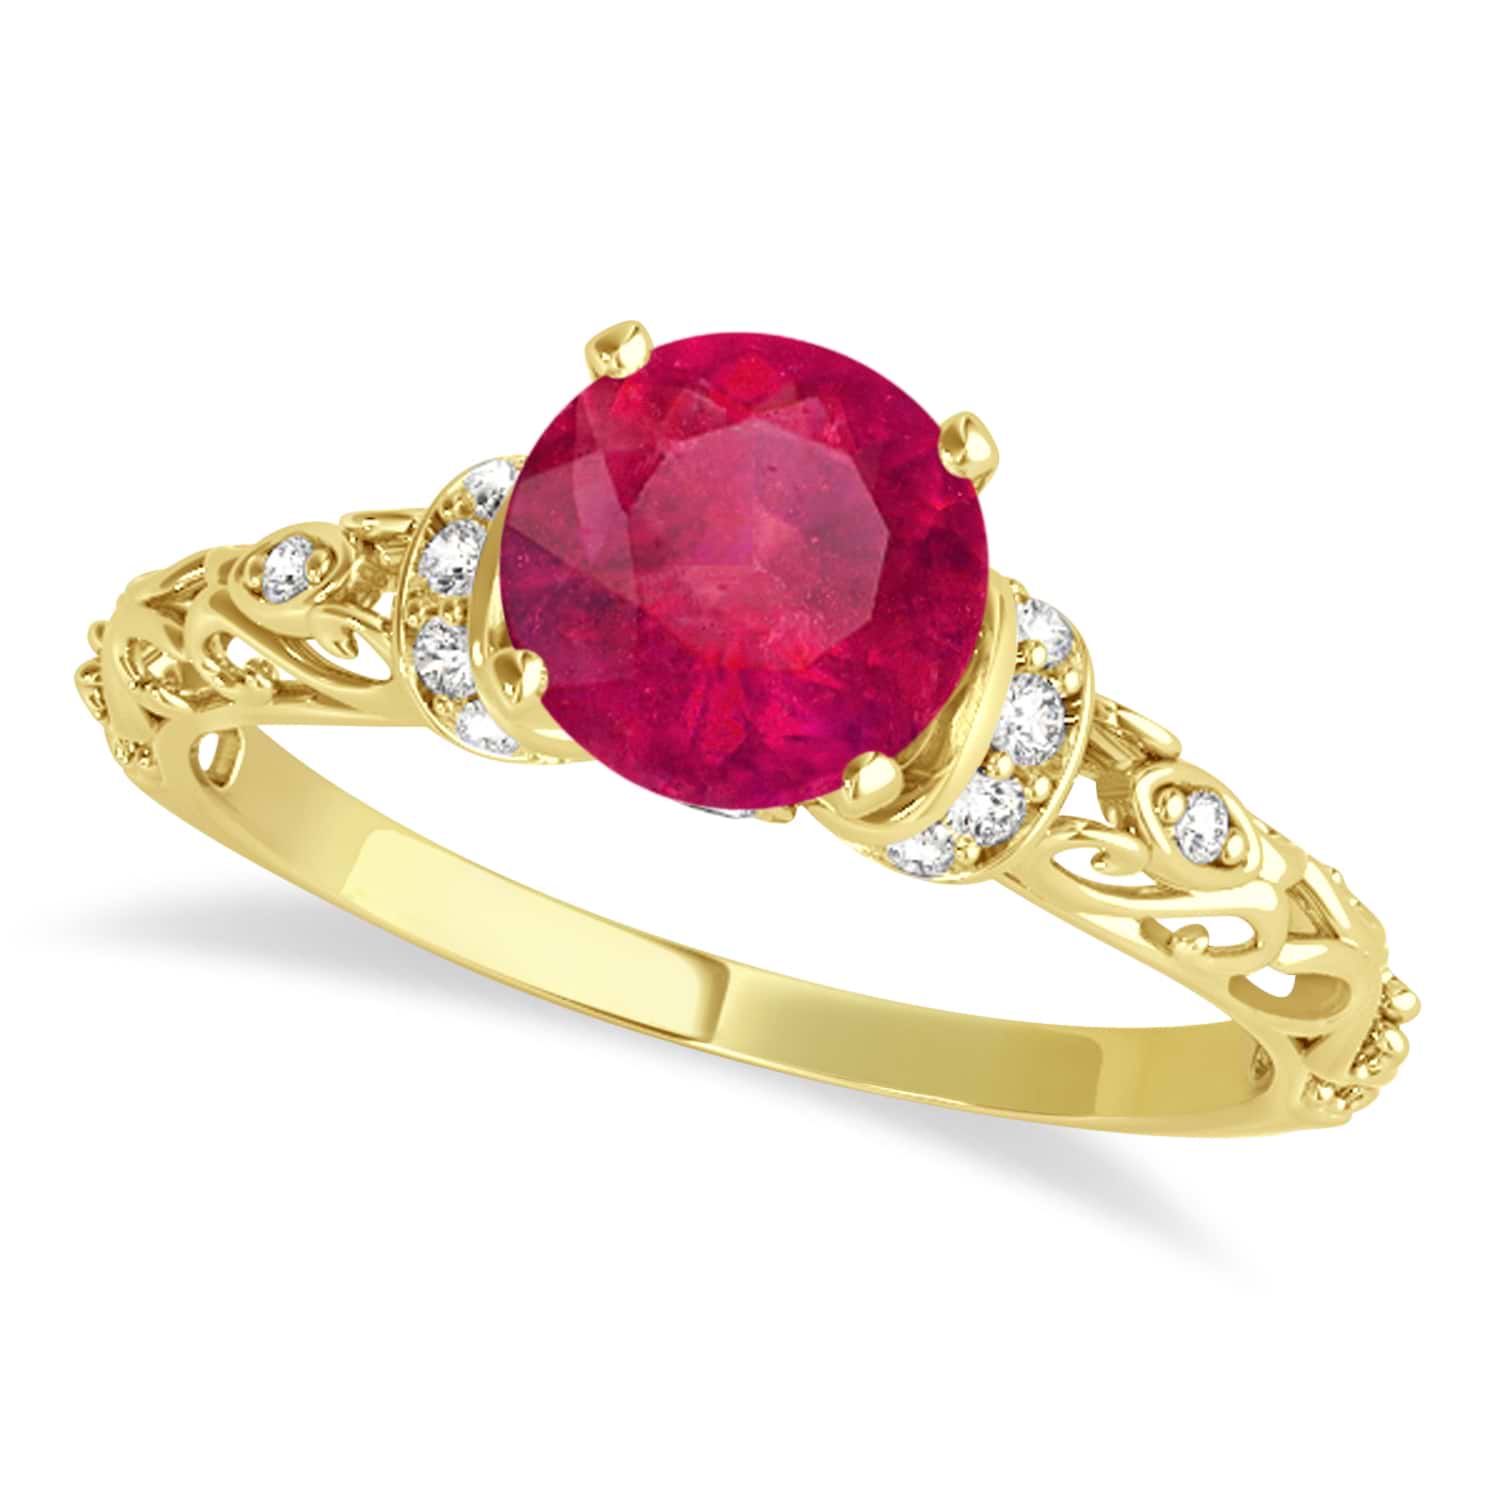 Ruby & Diamond Antique Style Engagement Ring 14k Yellow Gold (0.87ct)